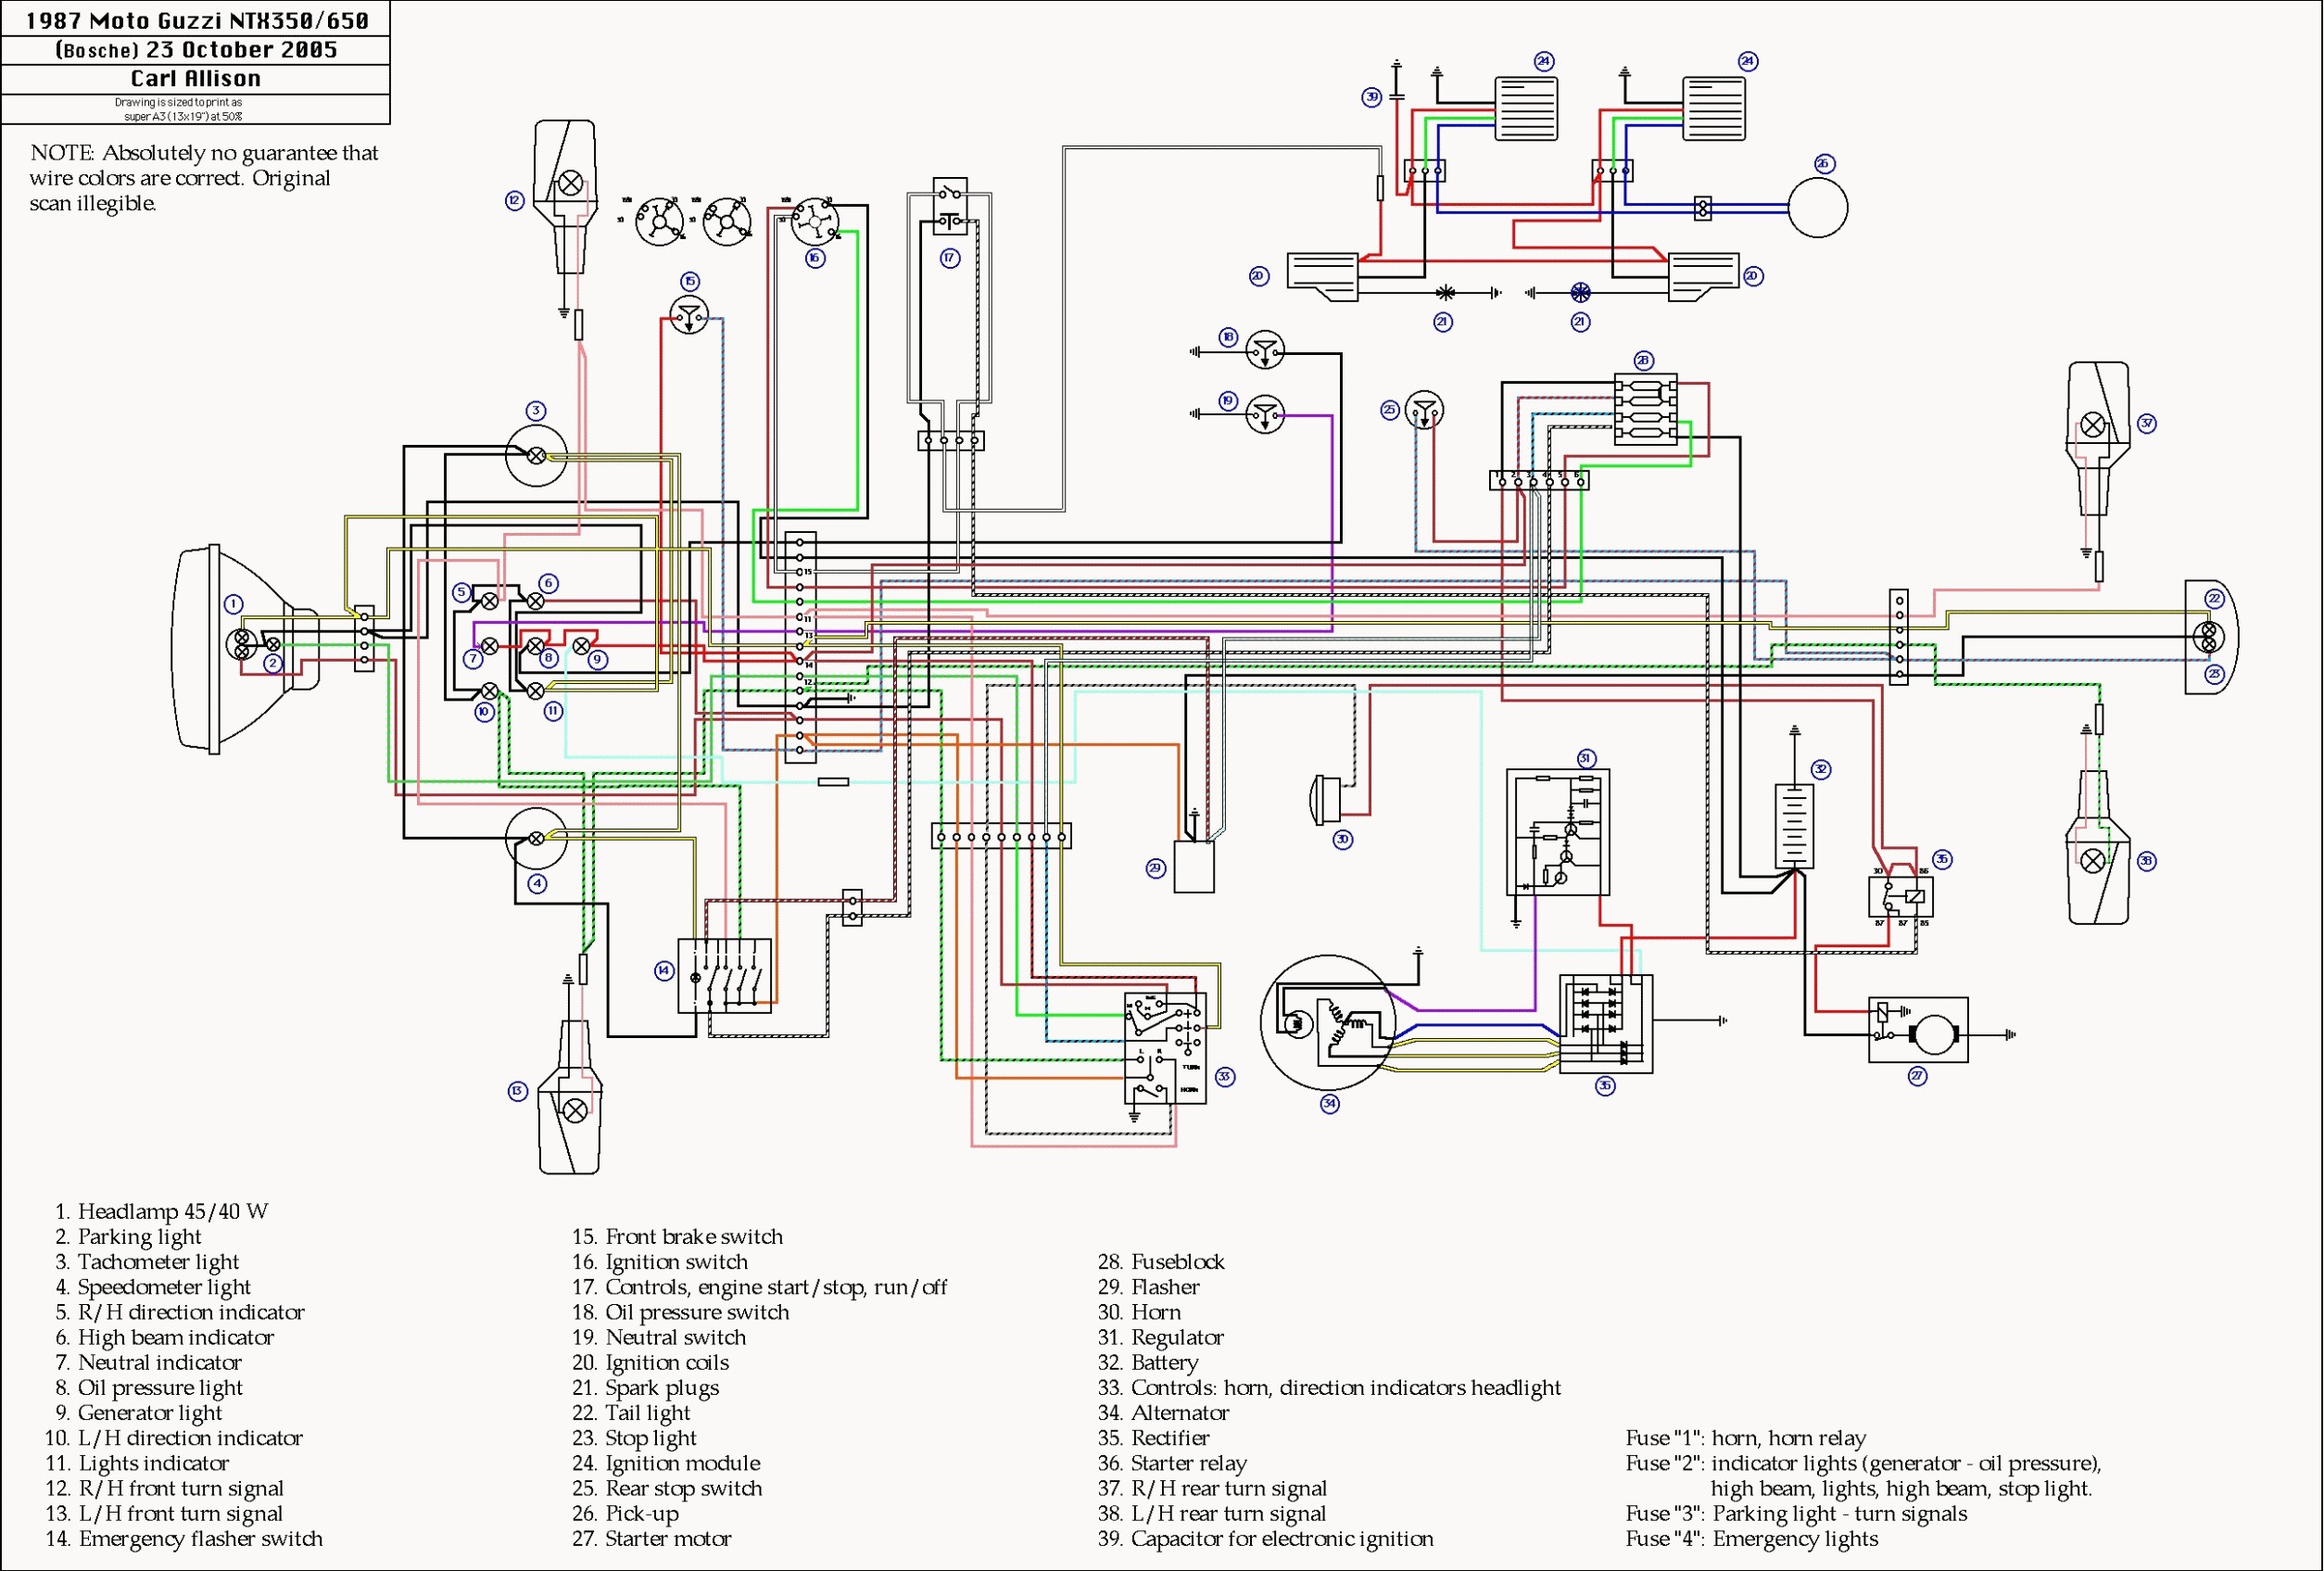 Where Can I Find Full Engine Diagram for My Car Yamaha Rs 4 Engine Diagram Download In 2020 Of Where Can I Find Full Engine Diagram for My Car